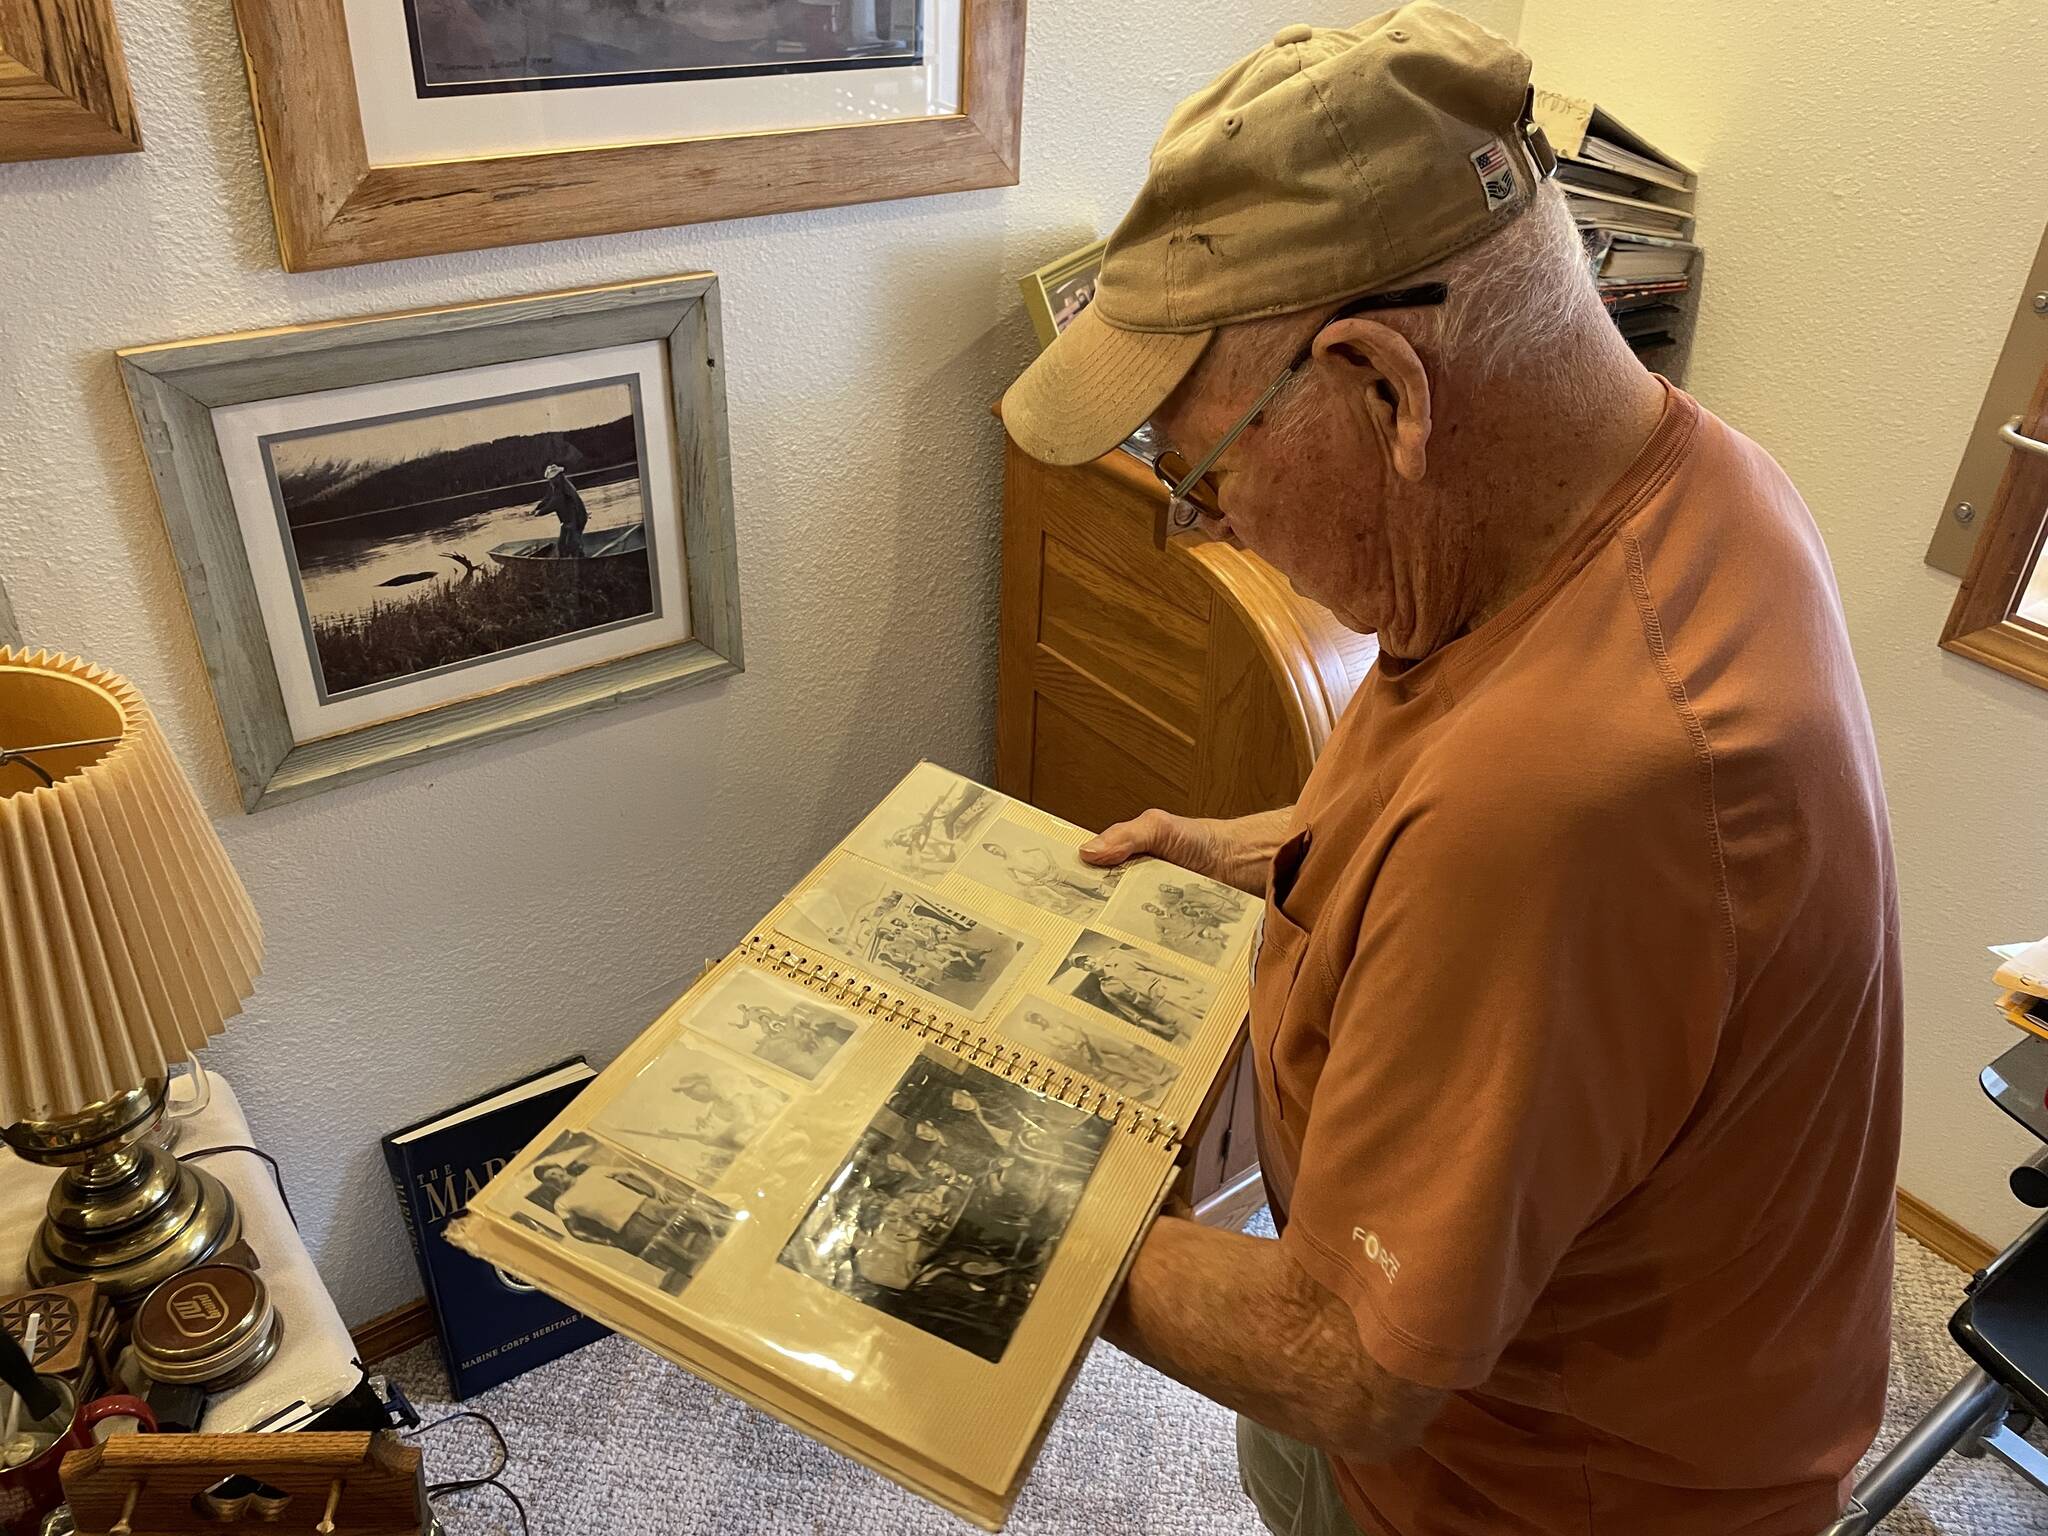 Irv Stephens looks at a book containing photos from his time in the Marine Corps during the Korean War on Nov. 2. (Michael S. Lockett / The Daily World)